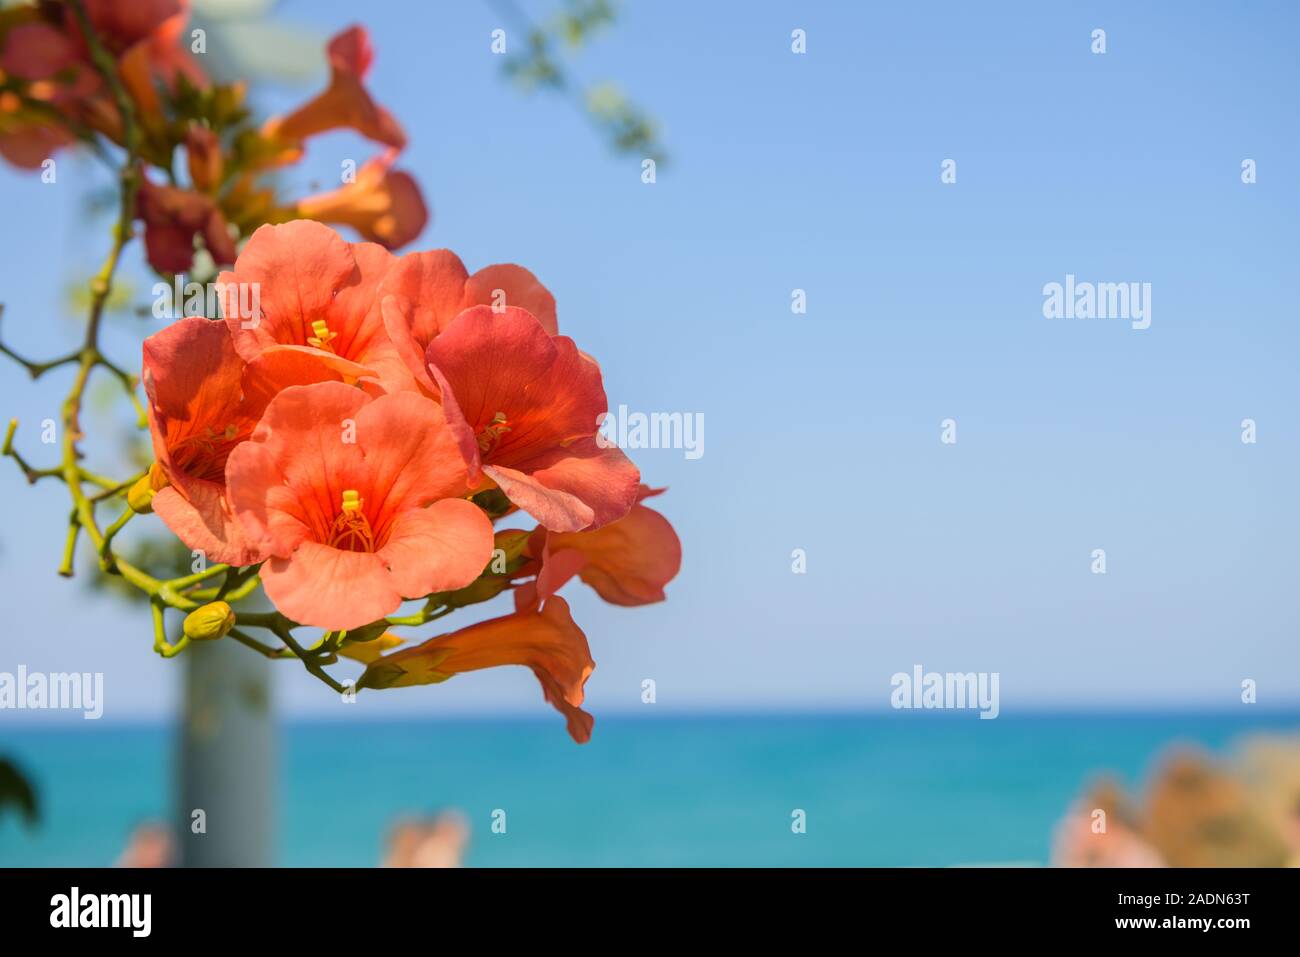 Rose bushes of flowers against blue sky and sea. Nature, sea concept. Horizontal close-up shot. Composition. Greece. Heraklion. Sunny summer day. Stock Photo